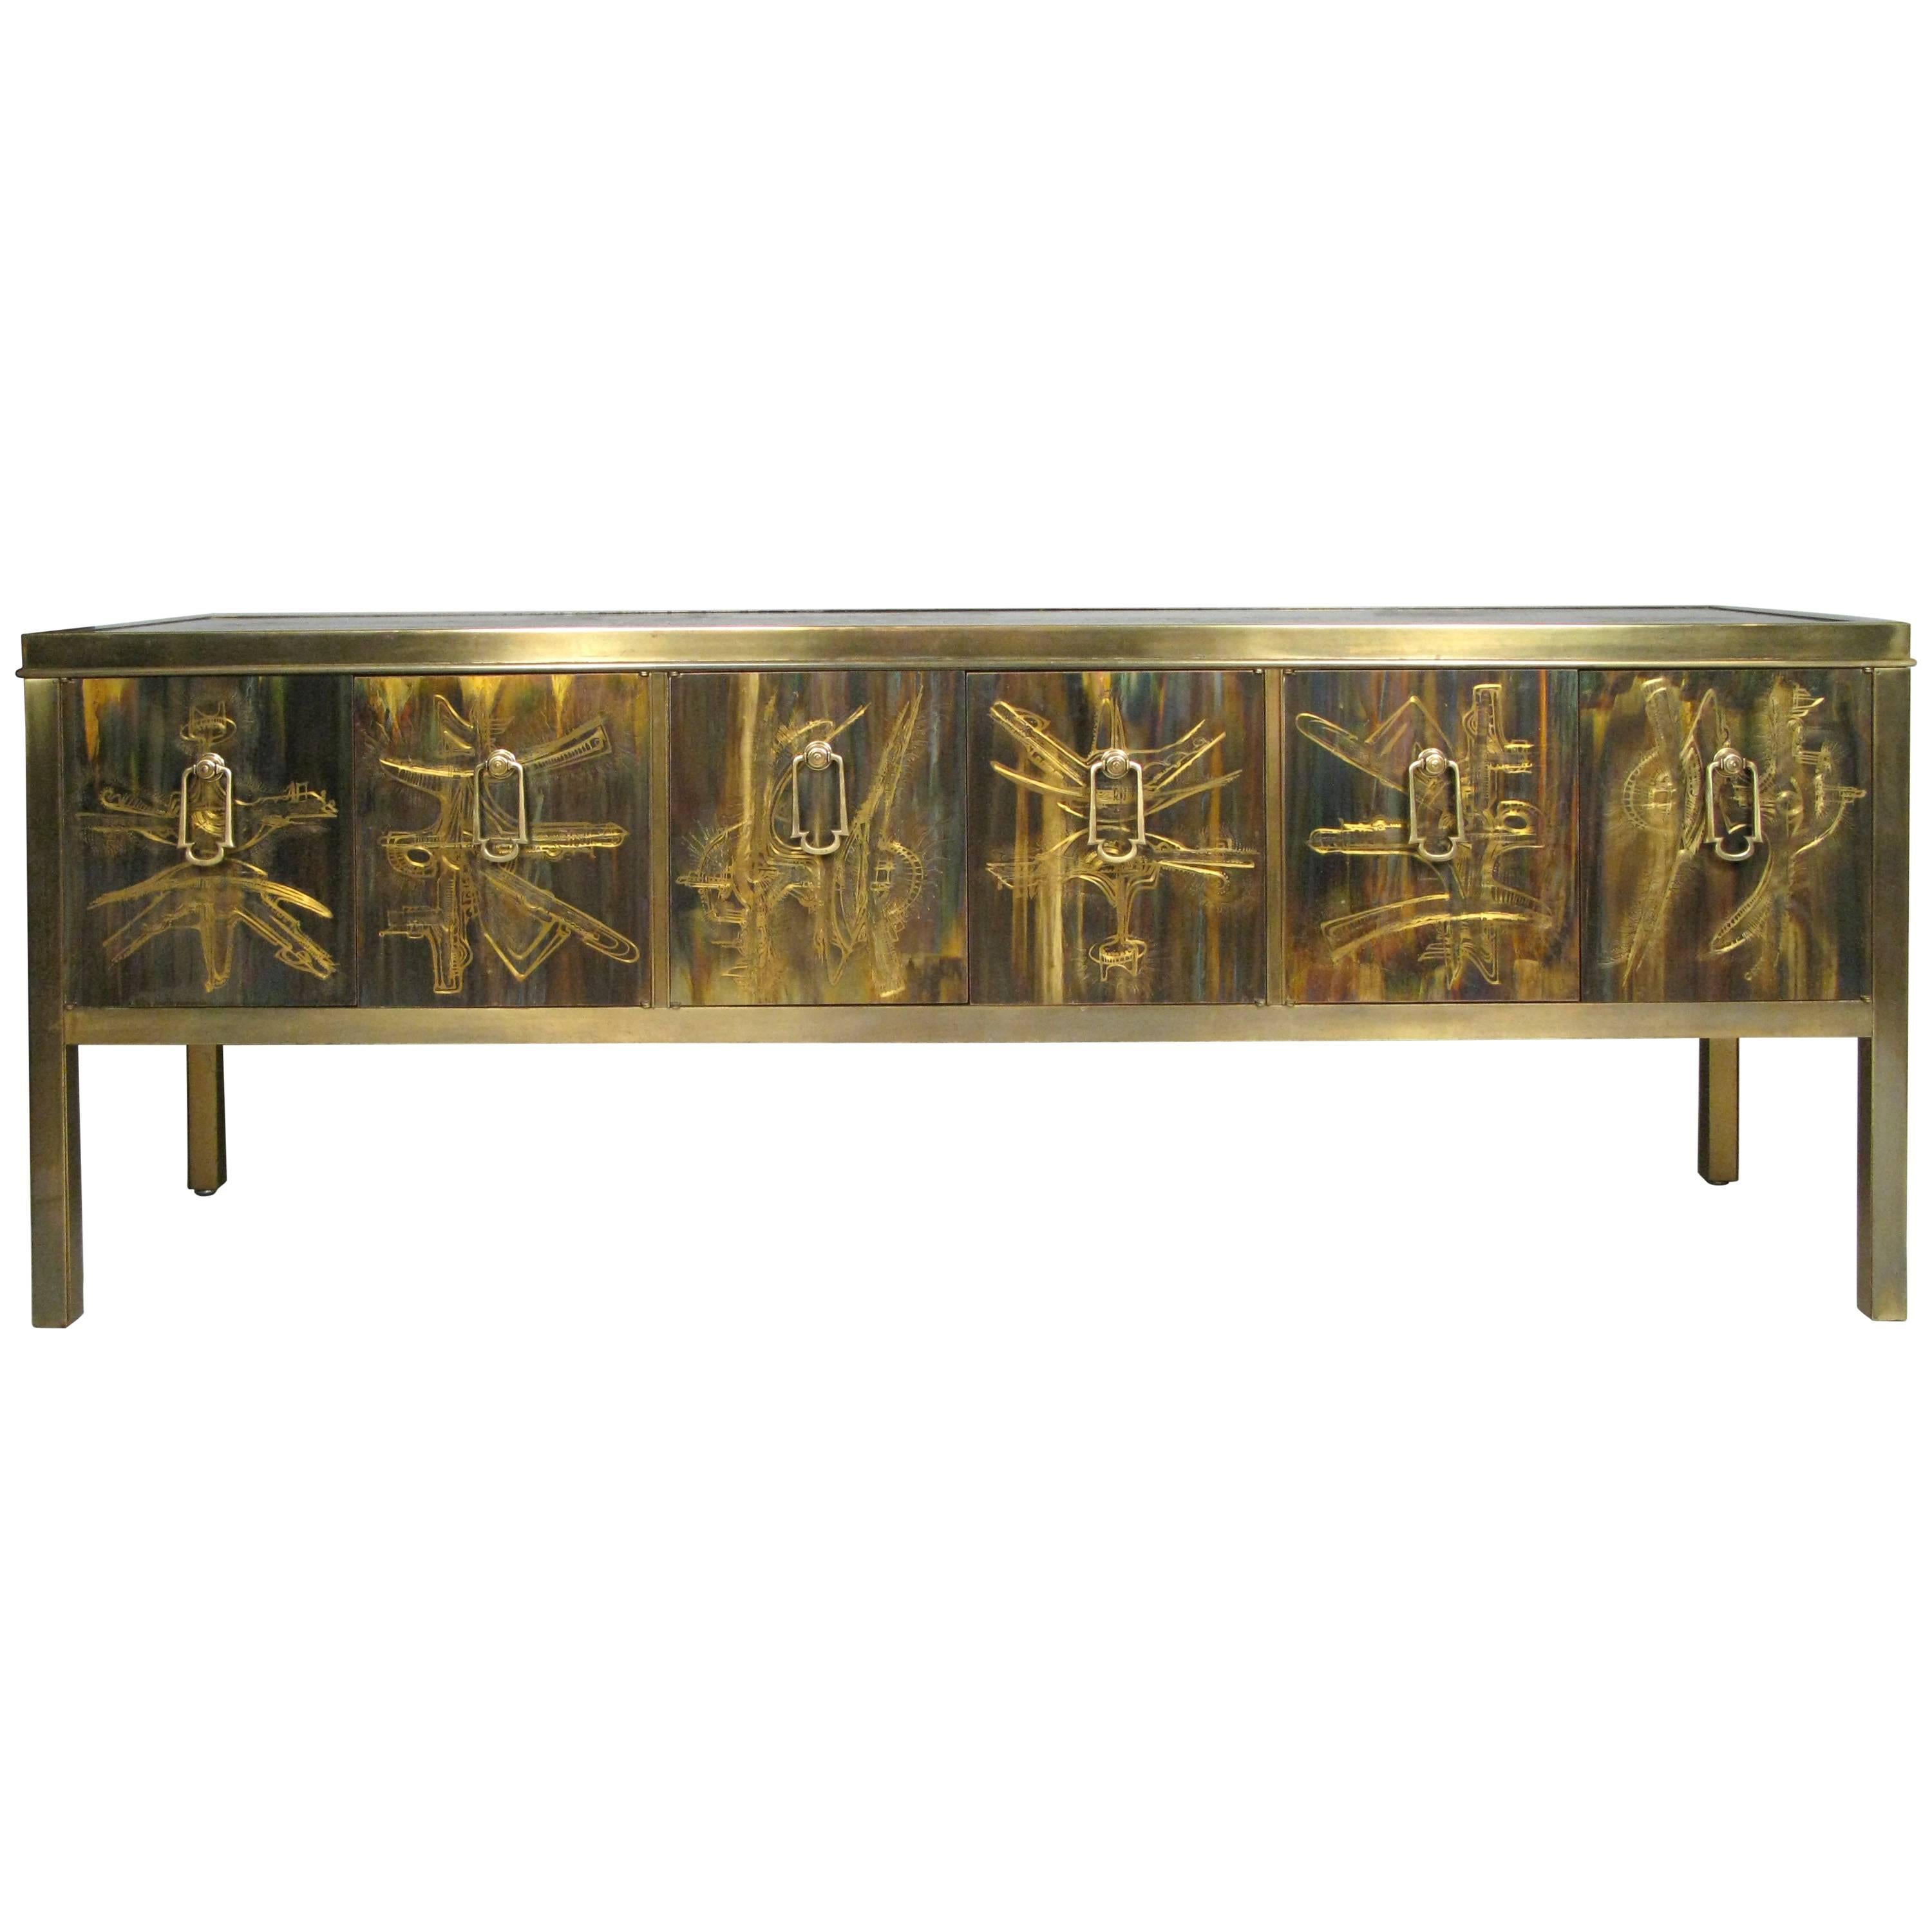 Outstanding Brass Cabinet by Bernhard Rohne for Mastercraft